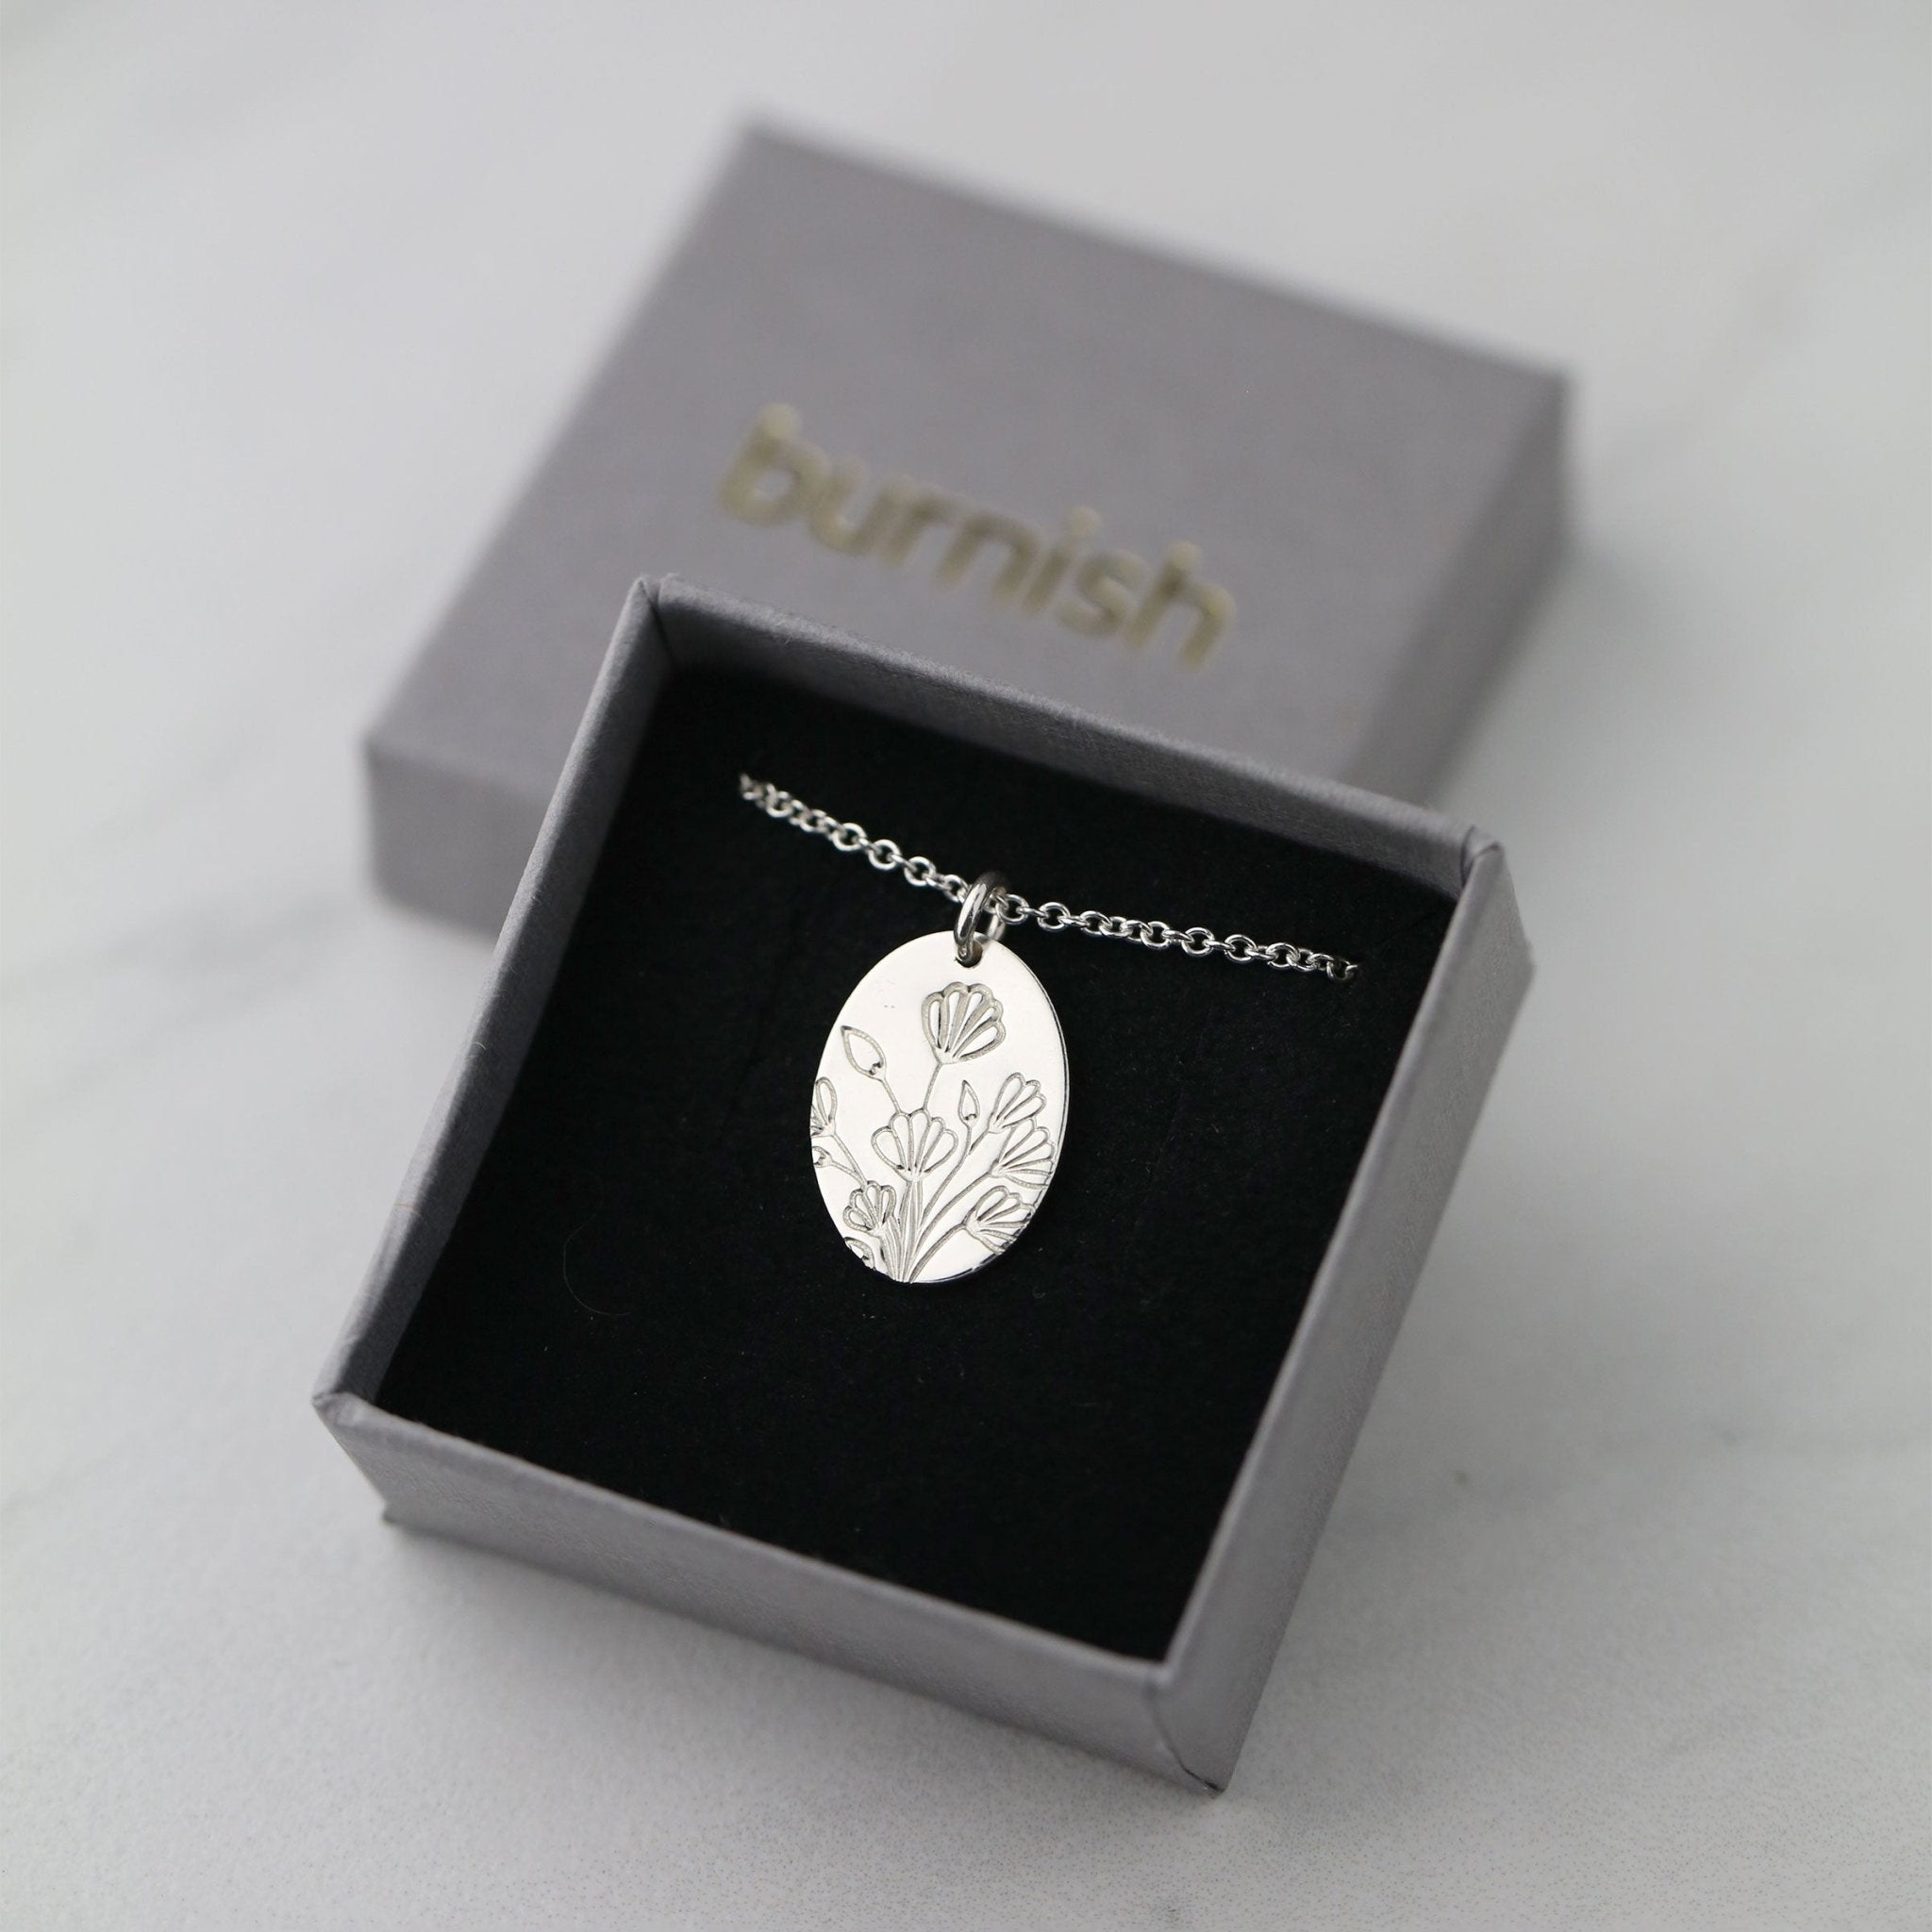 Hand Stamped Floral Oval Necklace handmade by Burnish